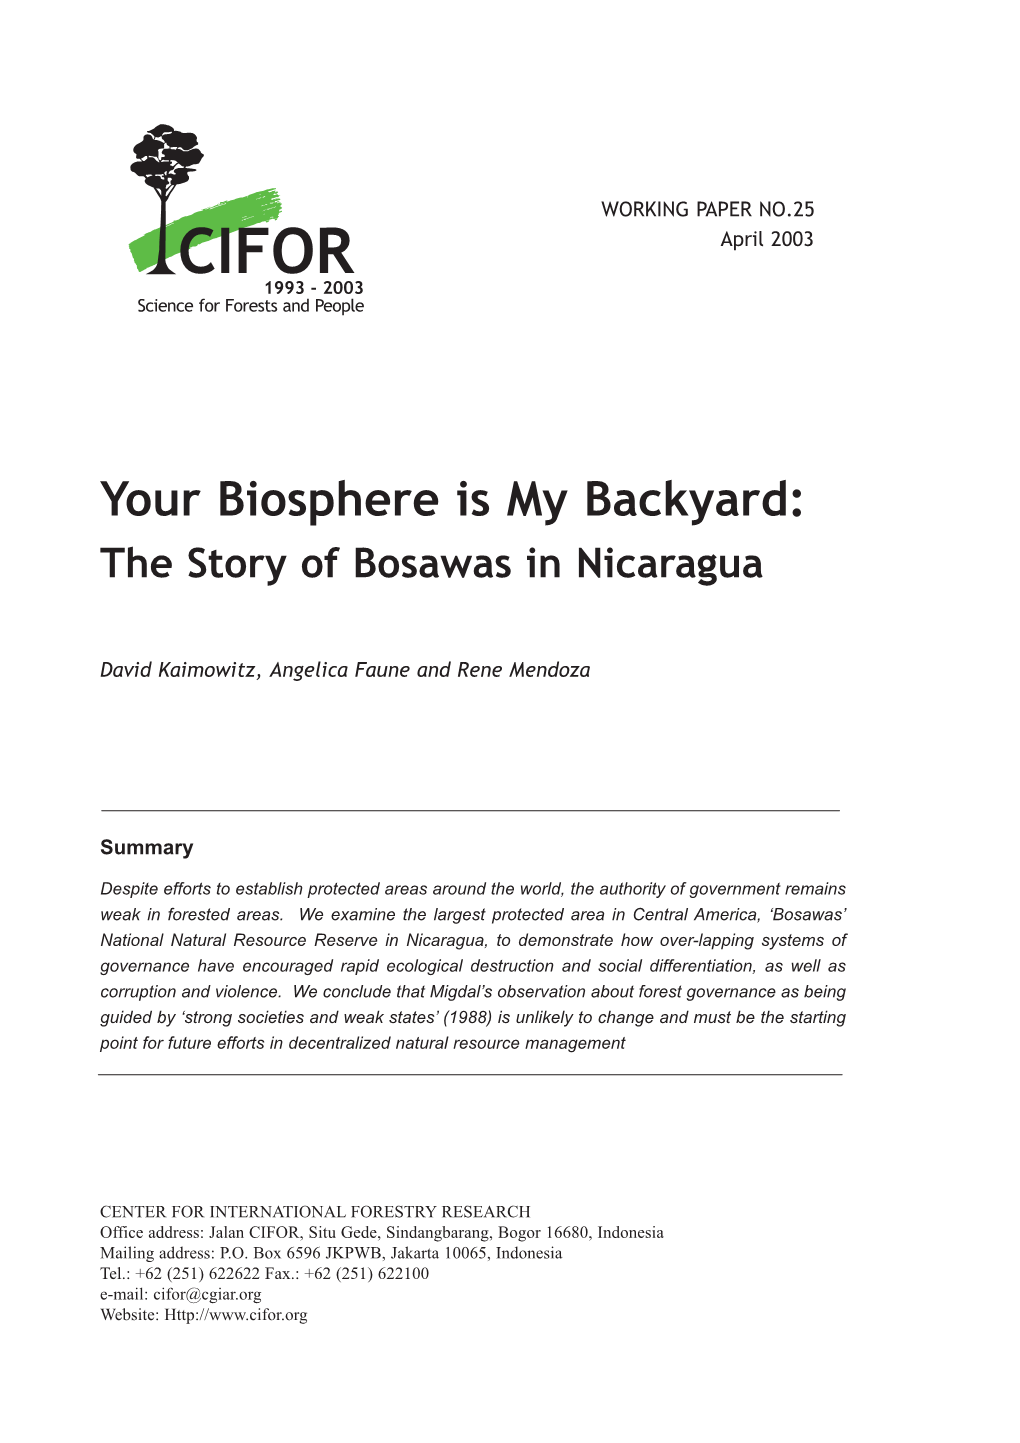 Your Biosphere Is My Backyard: the Story of Bosawas in Nicaragua